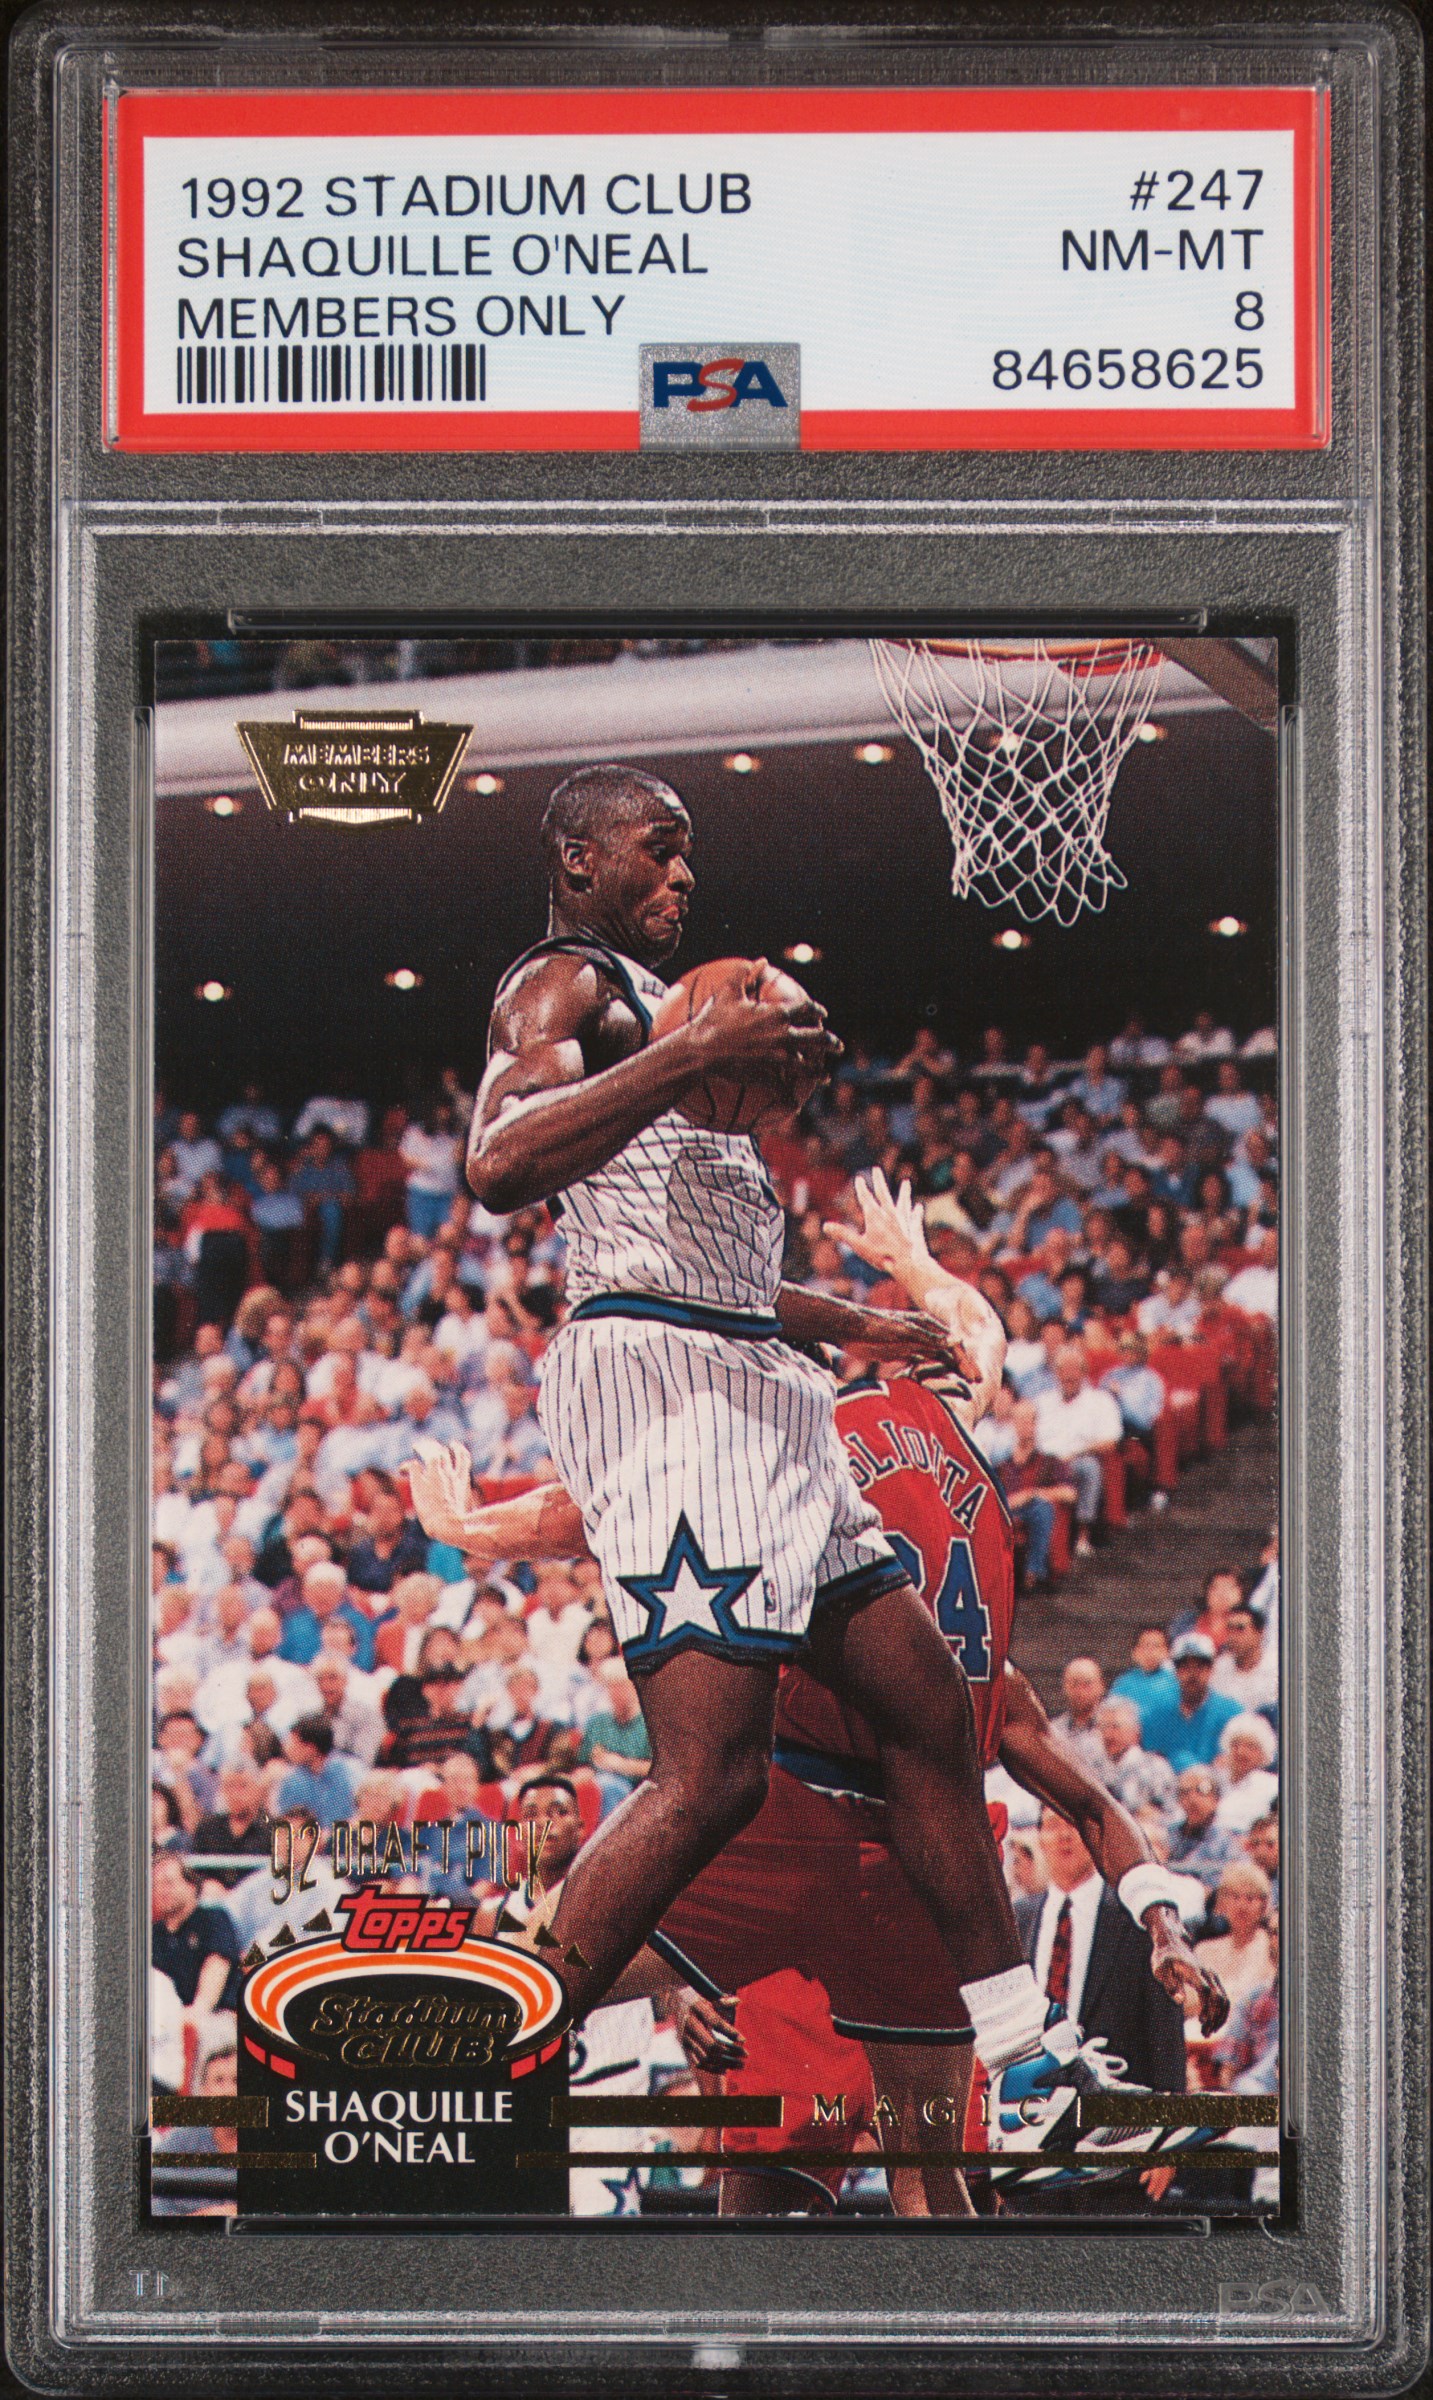 1992 Stadium Club Members Only #247 Shaquille O'Neal PSA 8